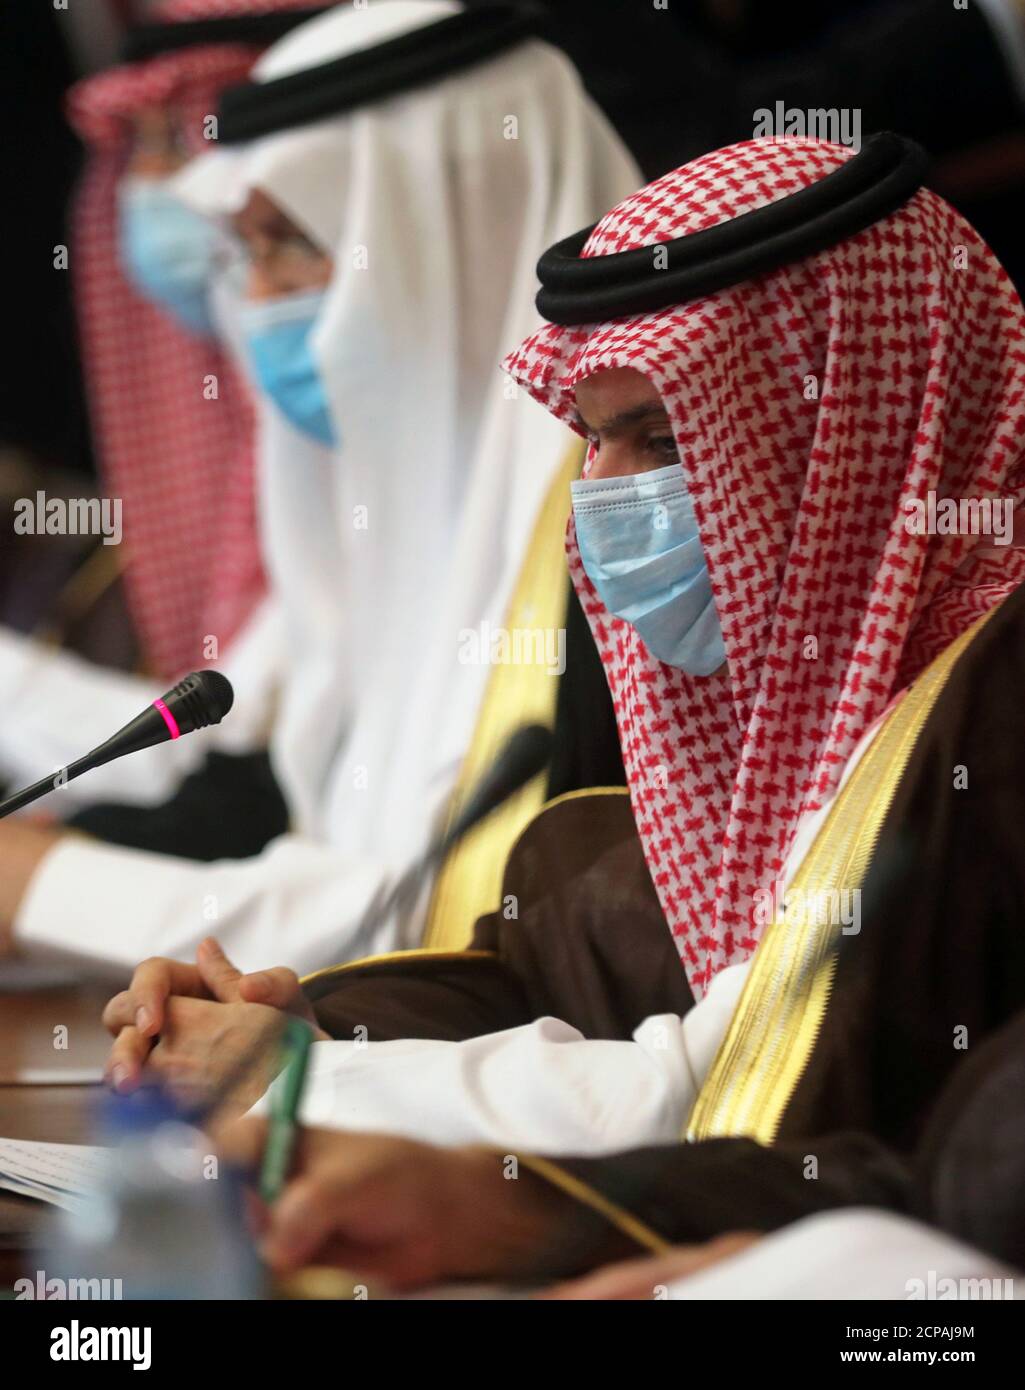 Saudi Foreign Minister Prince Faisal bin Farhan al-Saud attends a meeting with Egyptian Foreign Minister Sameh Shoukry at Tahrir Palace in Cairo, Egypt July 27, 2020. REUTERS/Mohamed Abd El Ghany REFILE - CORRECTING ID Stock Photo